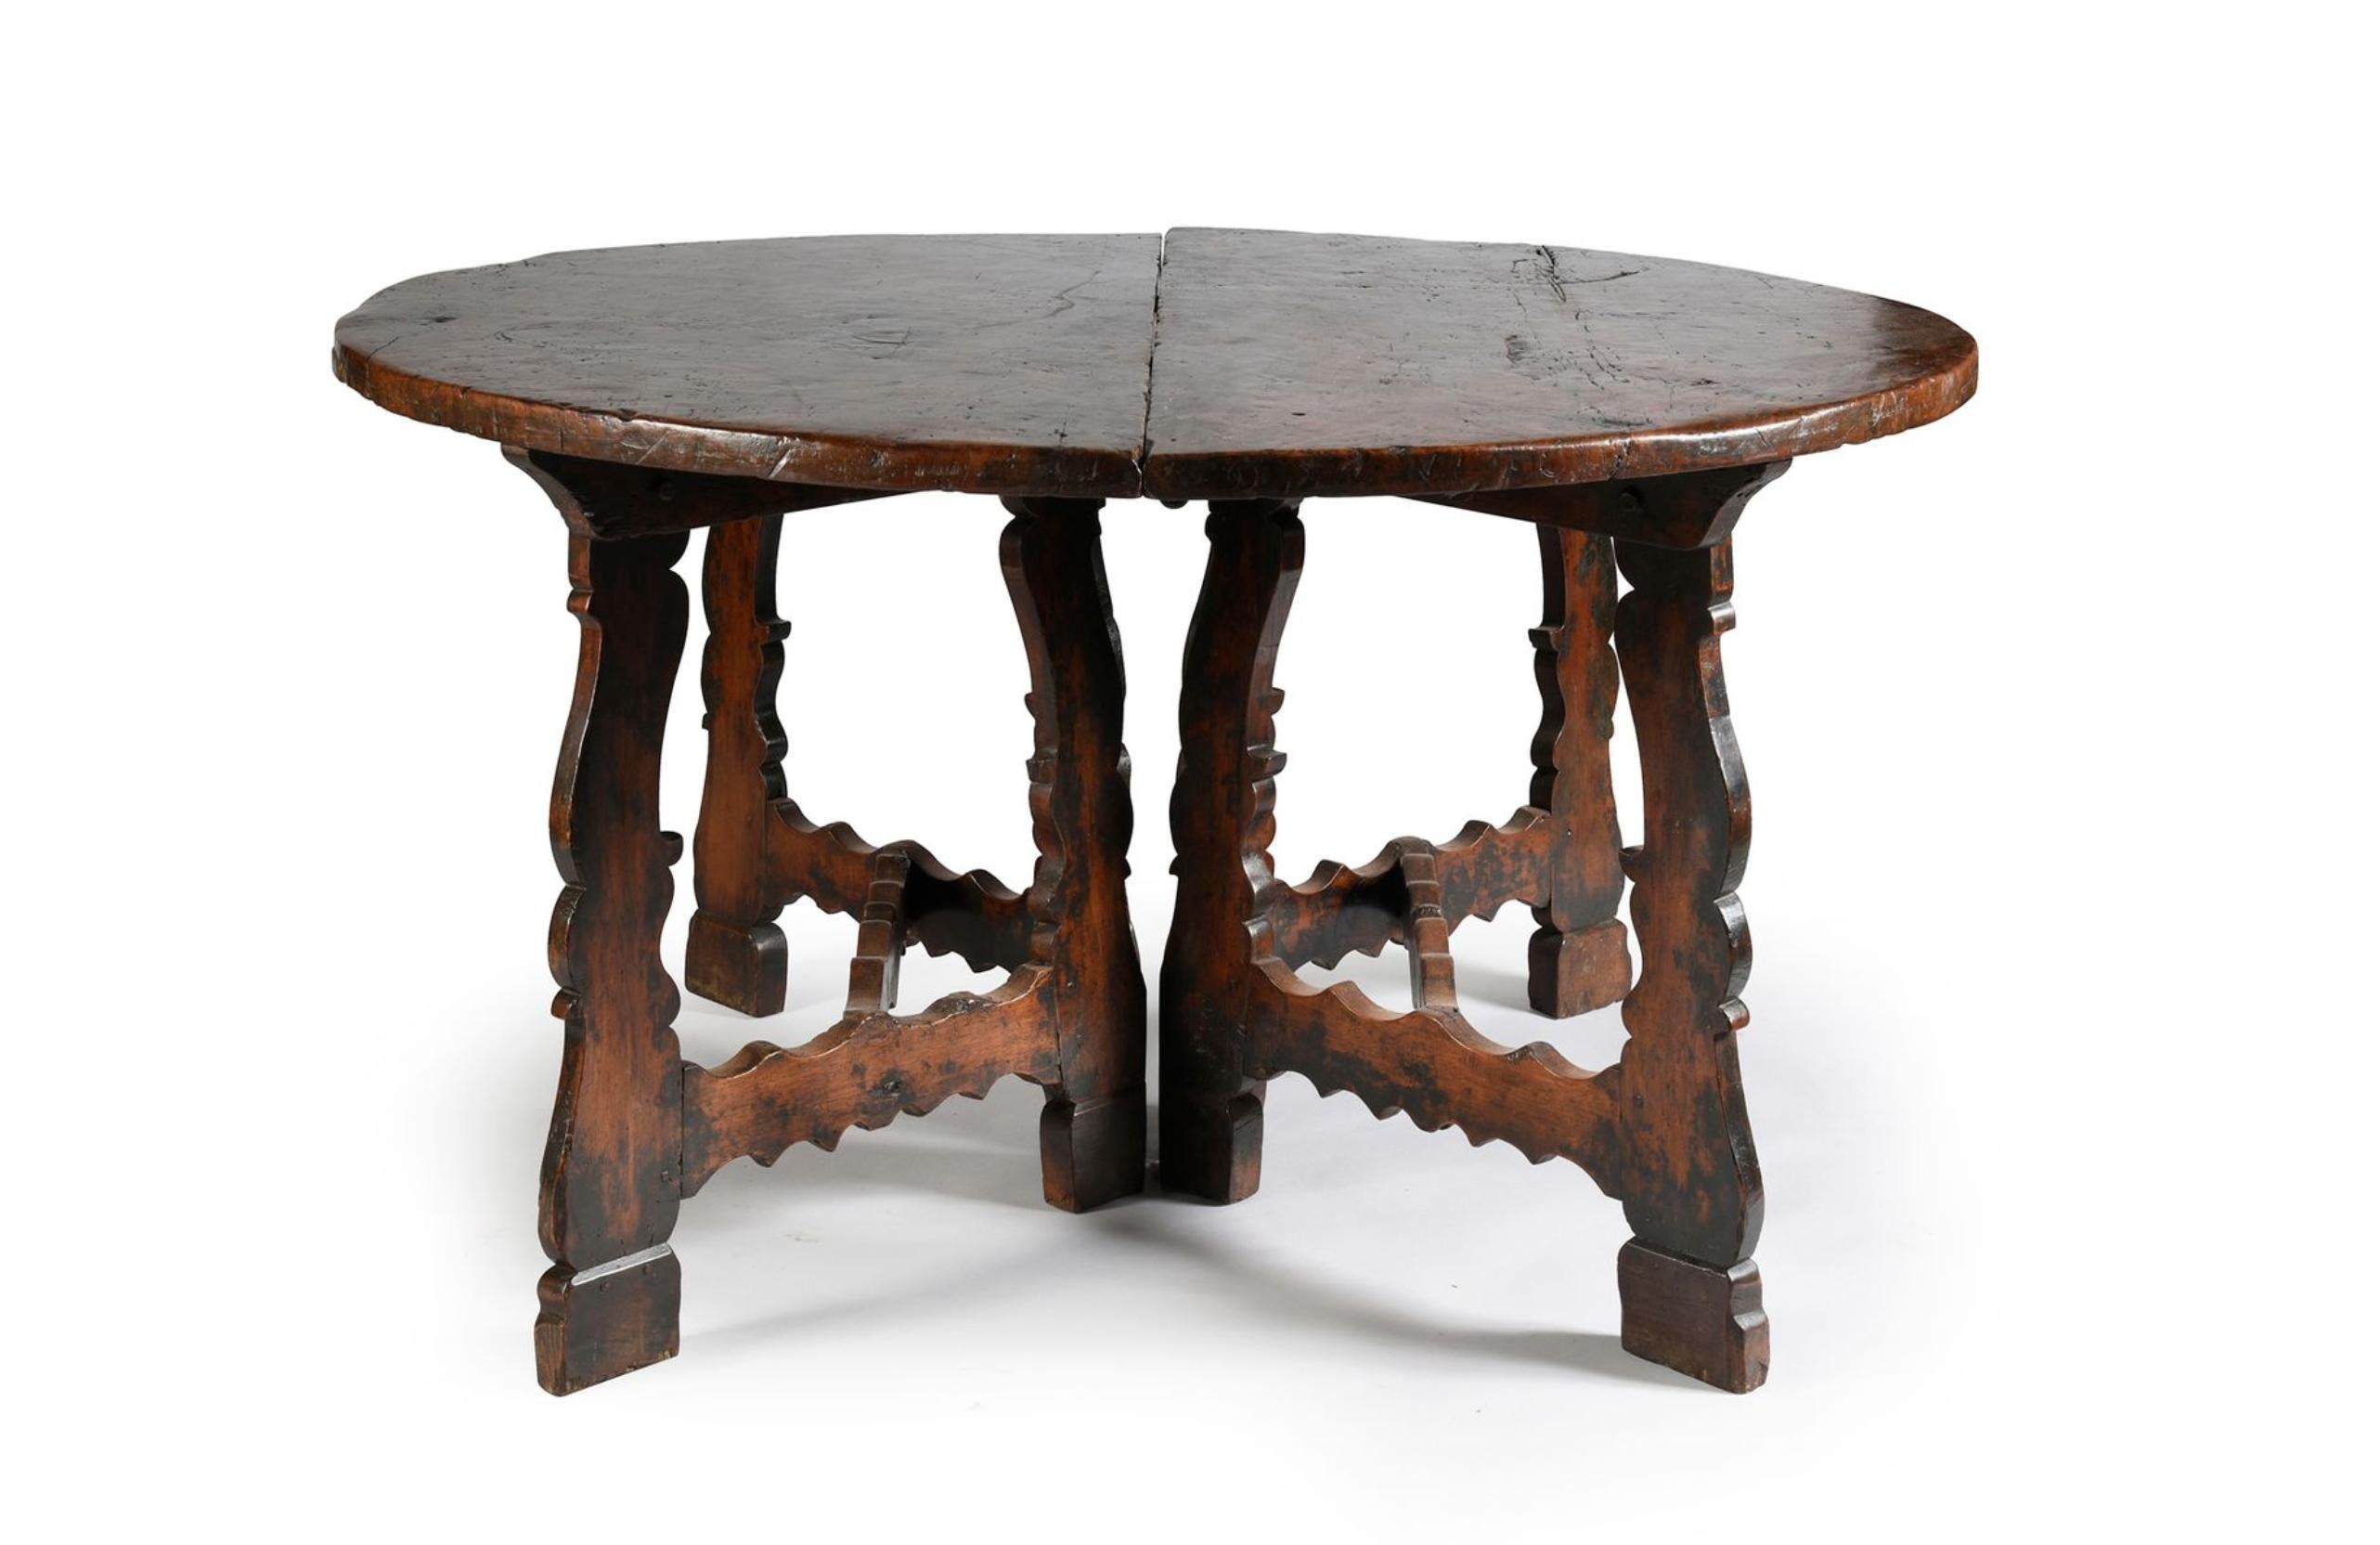 Other 18th Century Paris of Consoles Forming a Center Table